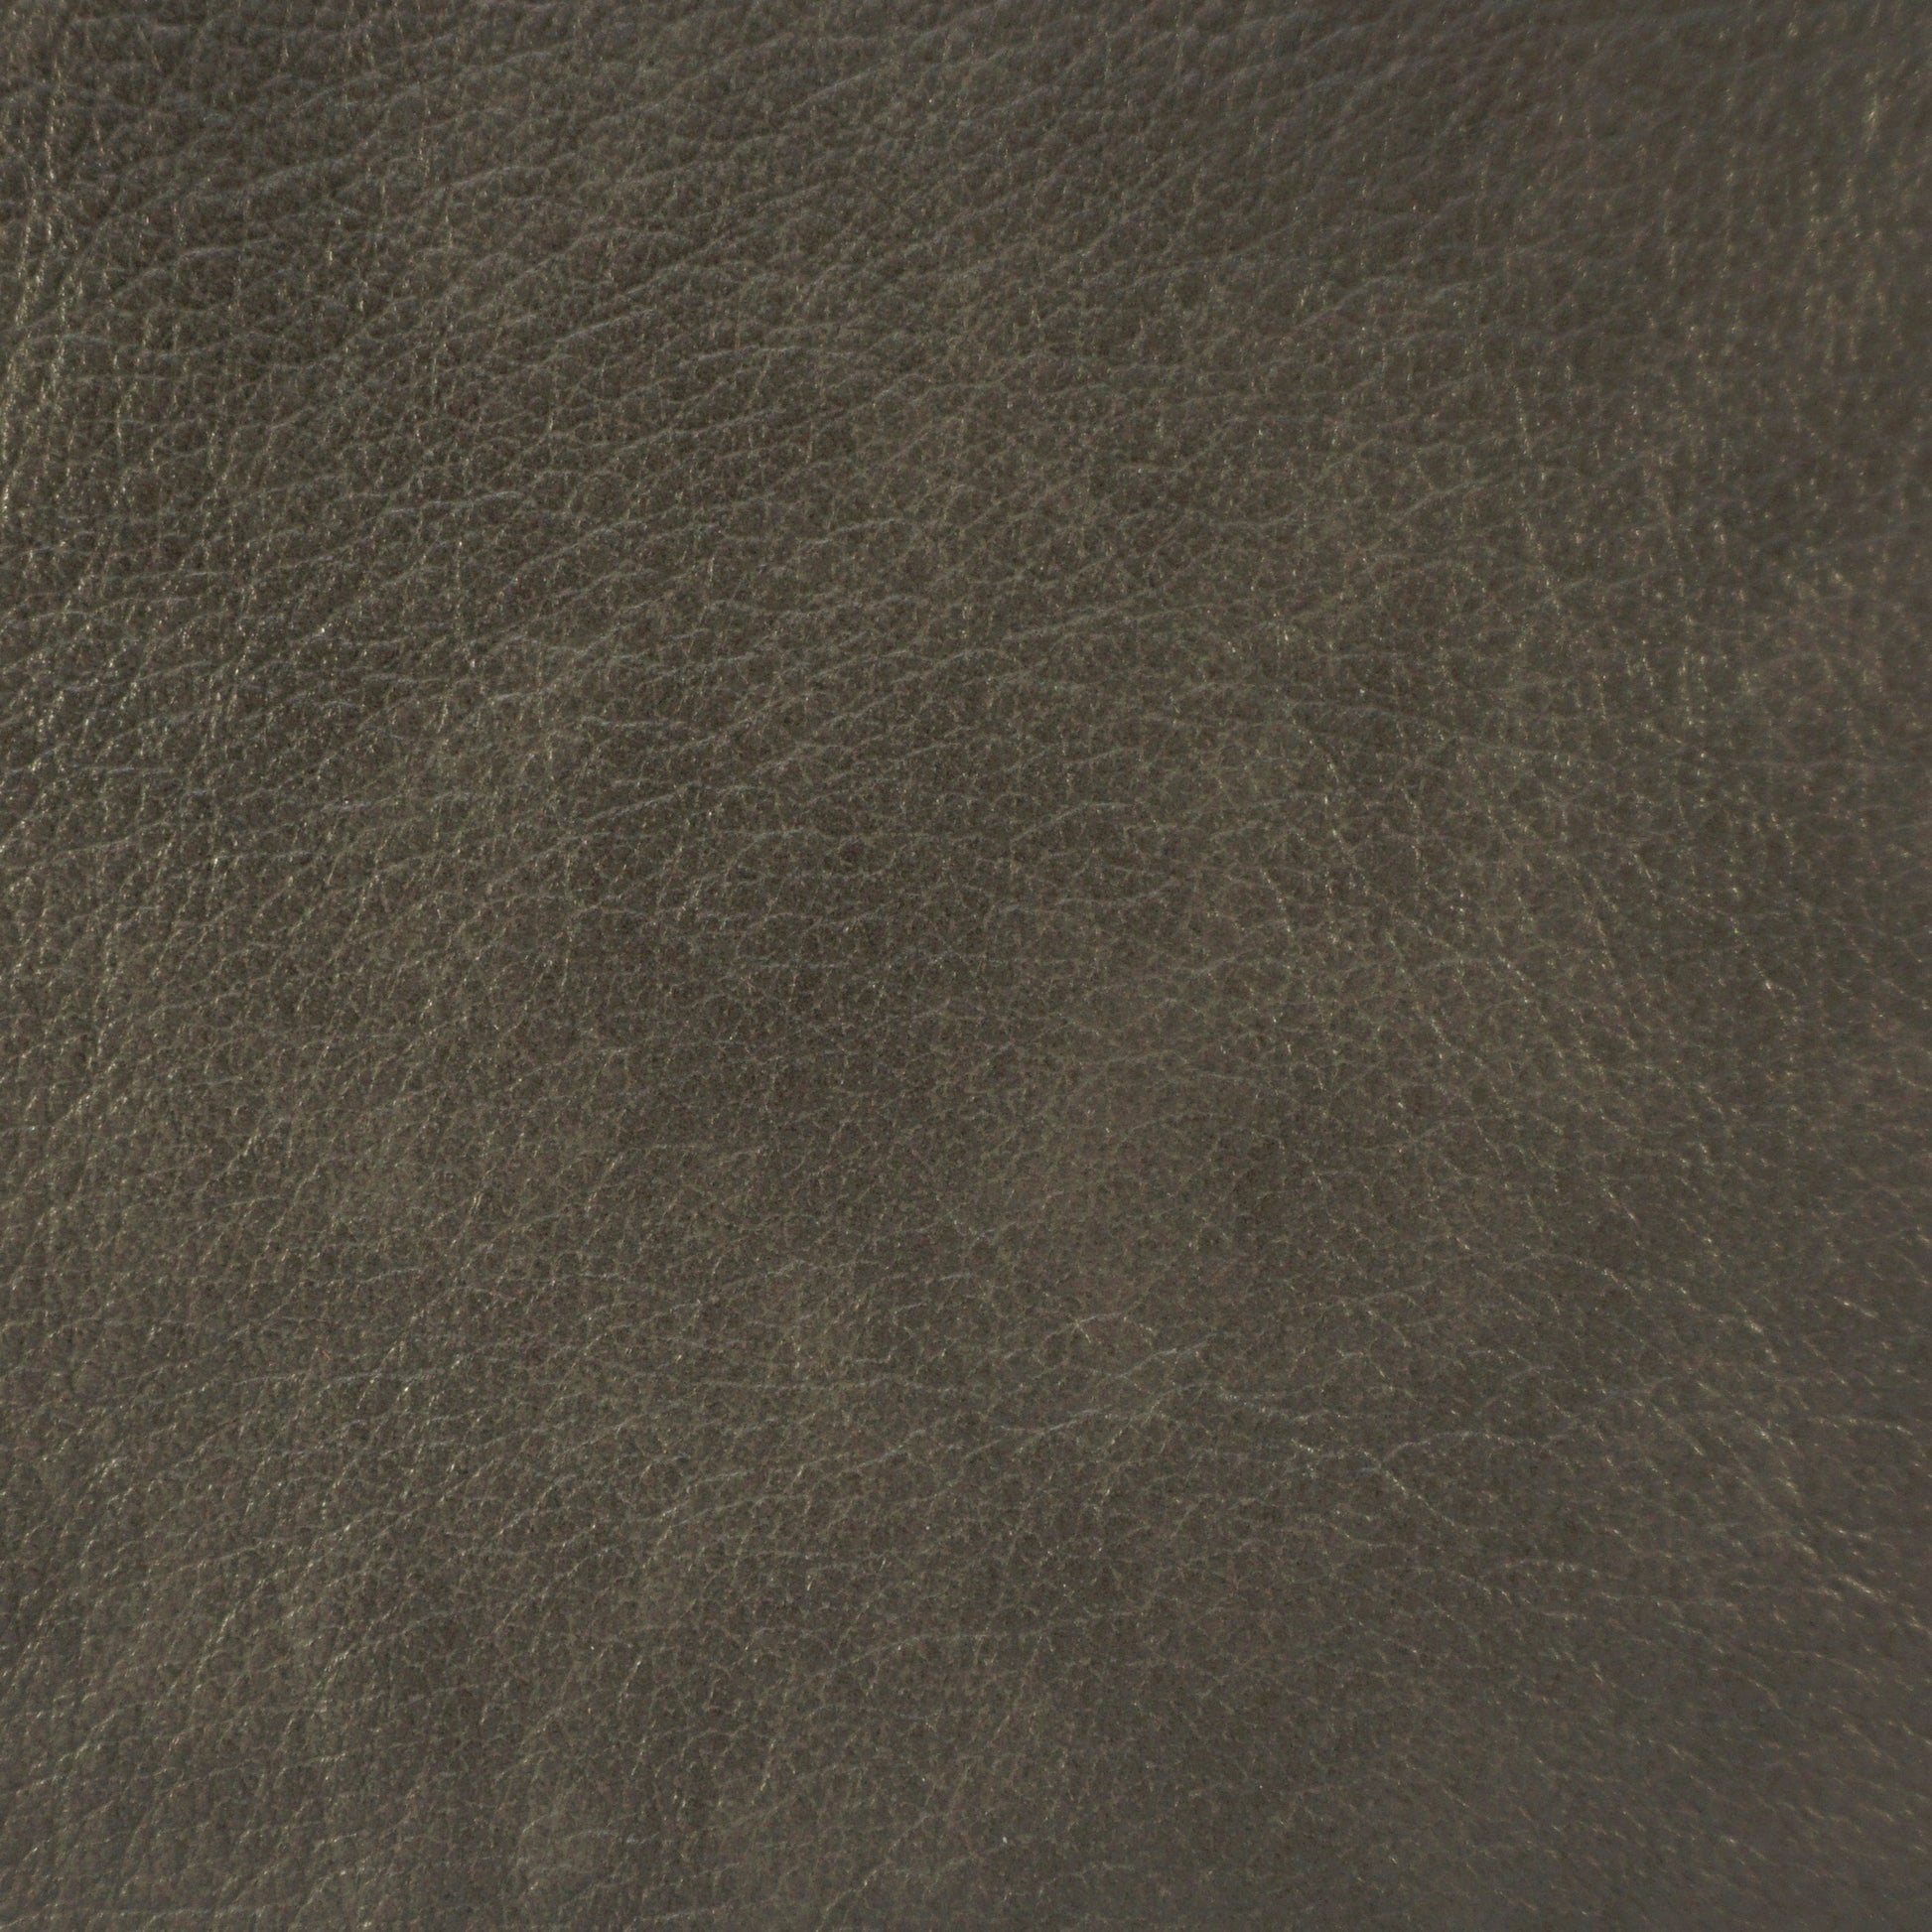 Trattoria, Sardina, Spilltop® Water Resistance, Hospitality Leather Hide